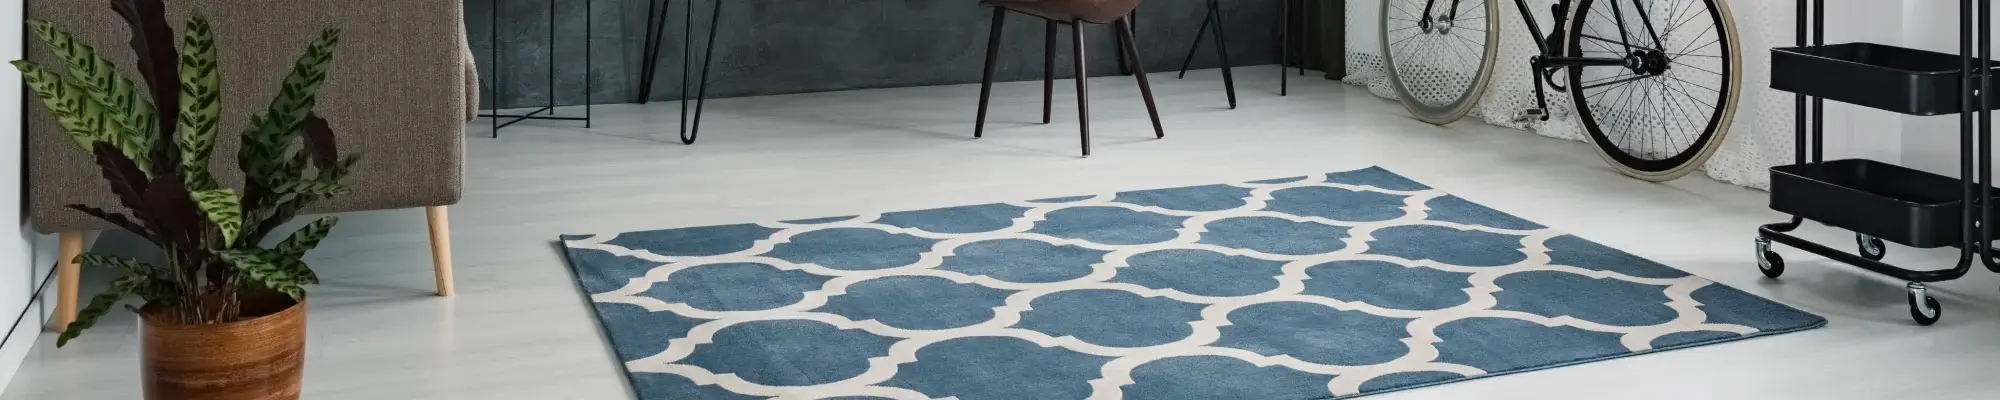 Modern neutral flooring with a blue and white area rug